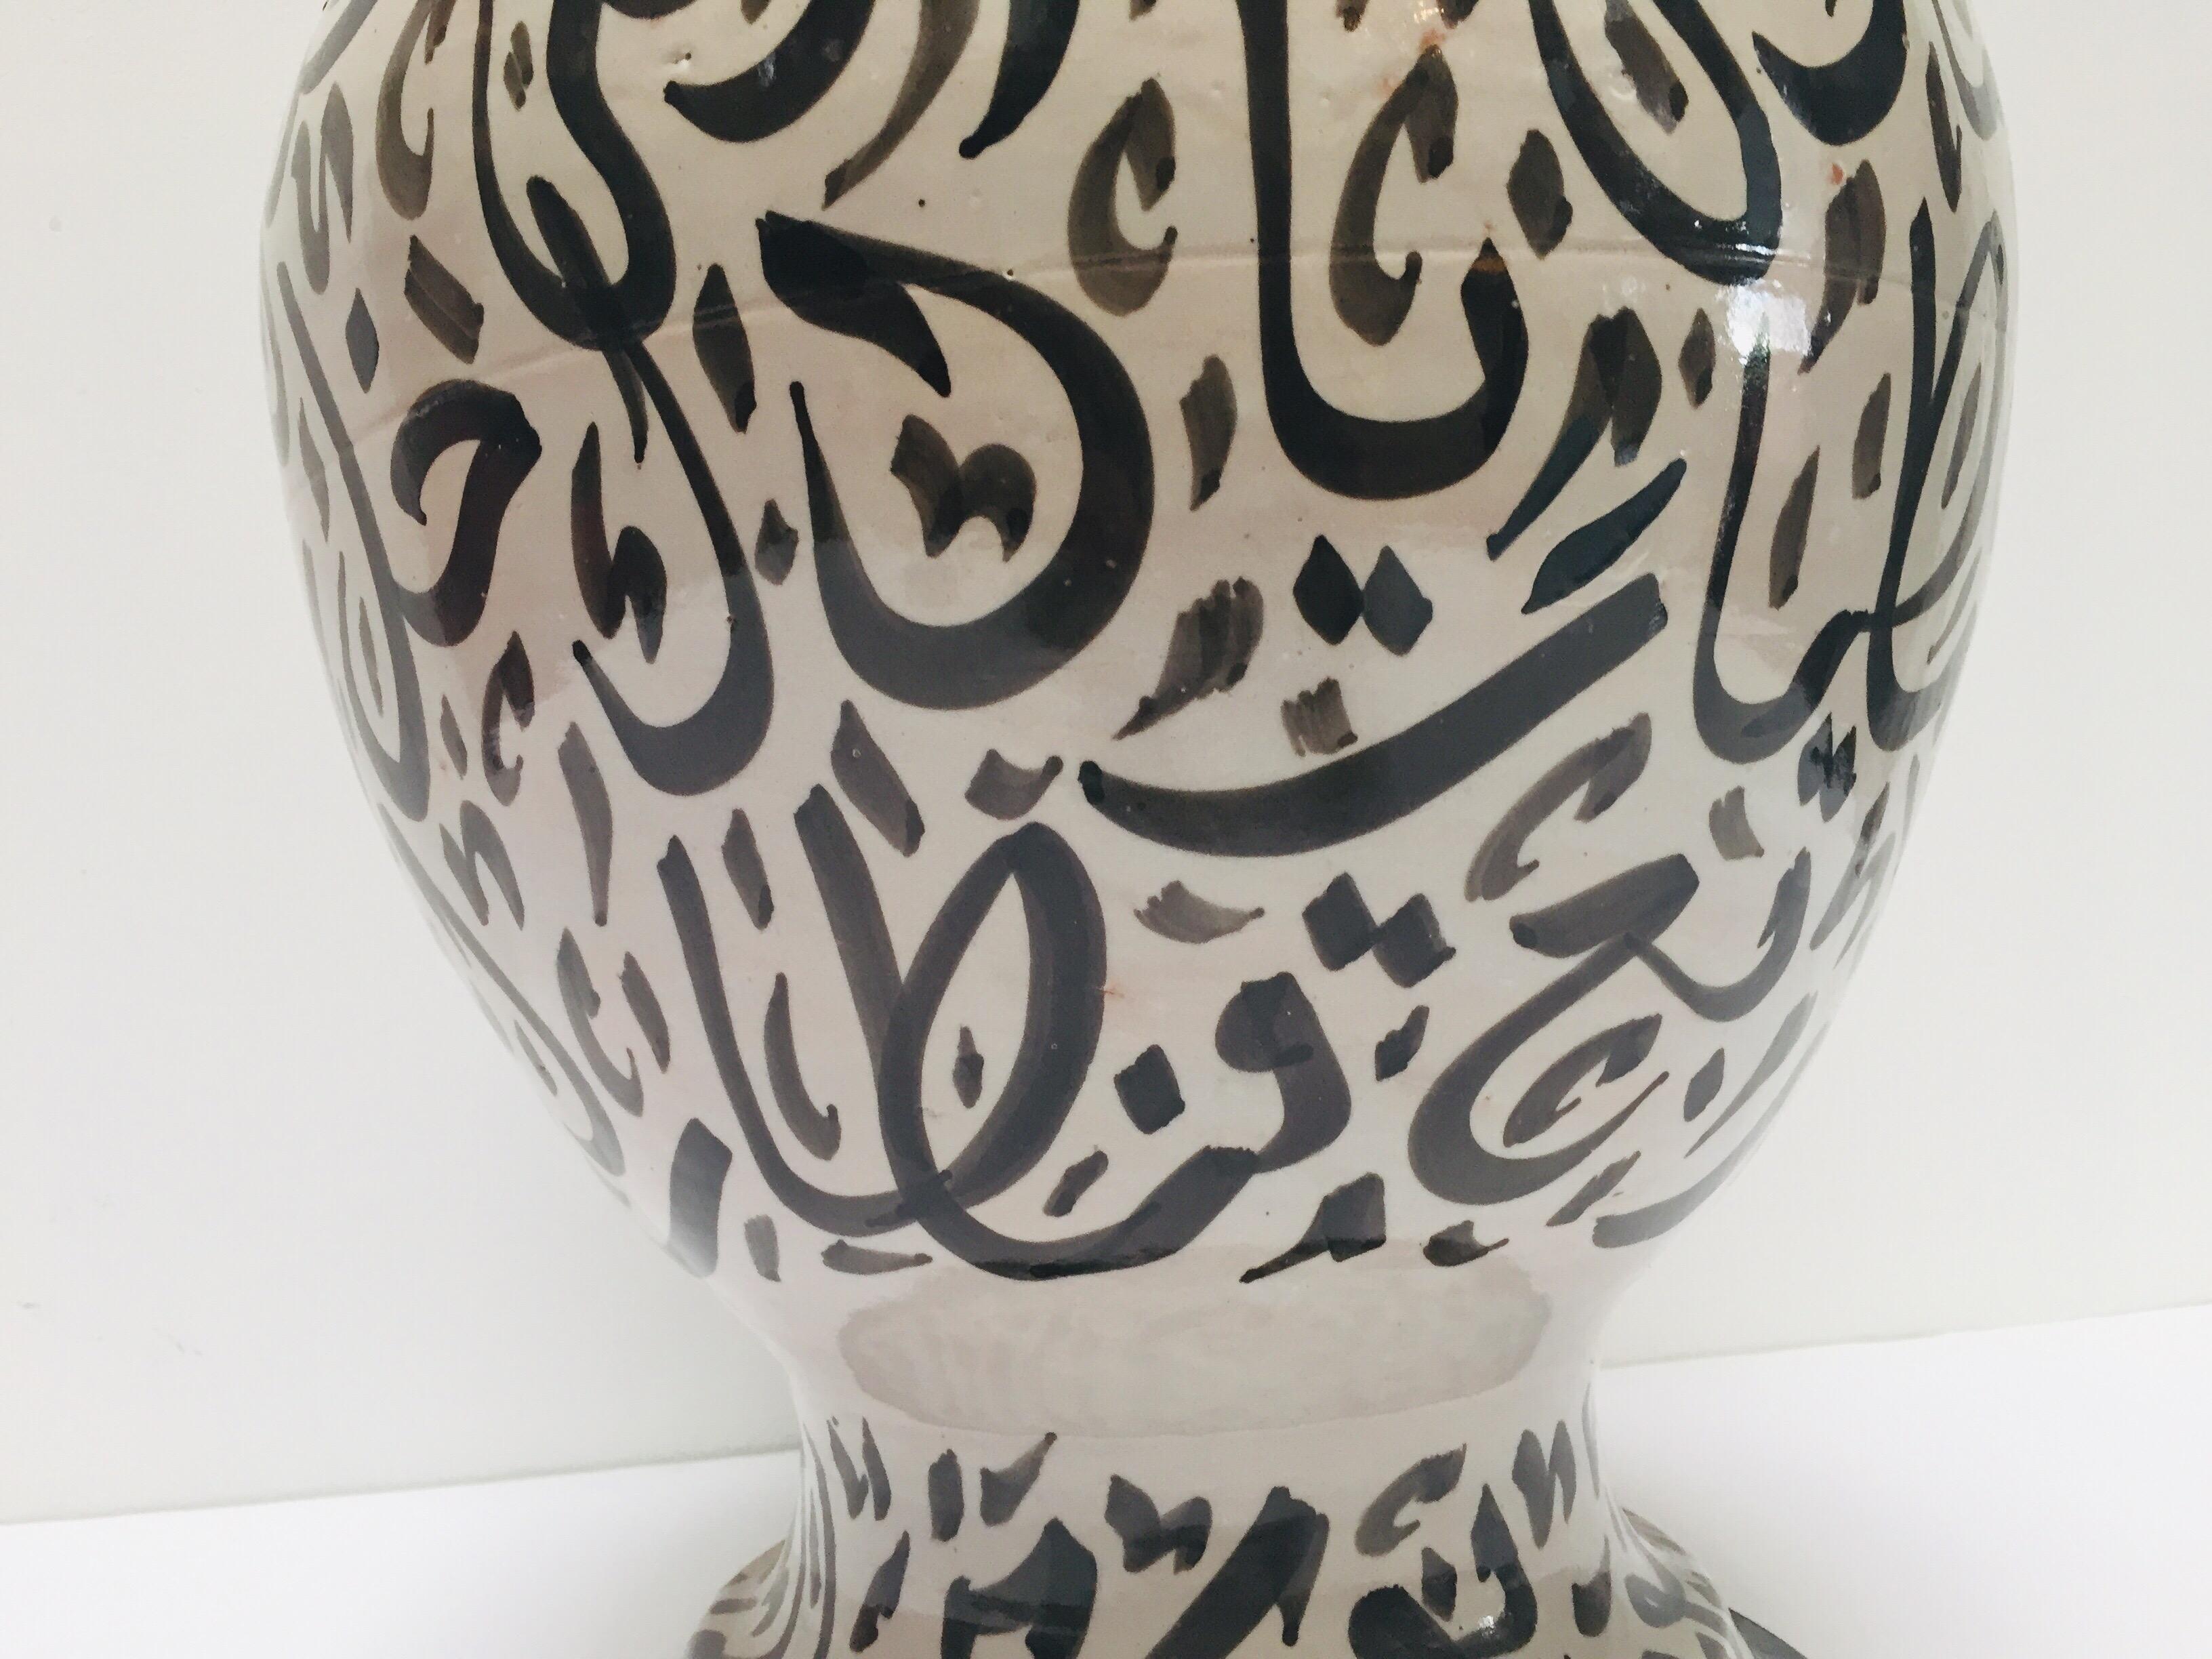 Large Moroccan Glazed Ceramic Vase with Arabic Calligraphy Brown Writing, Fez 6